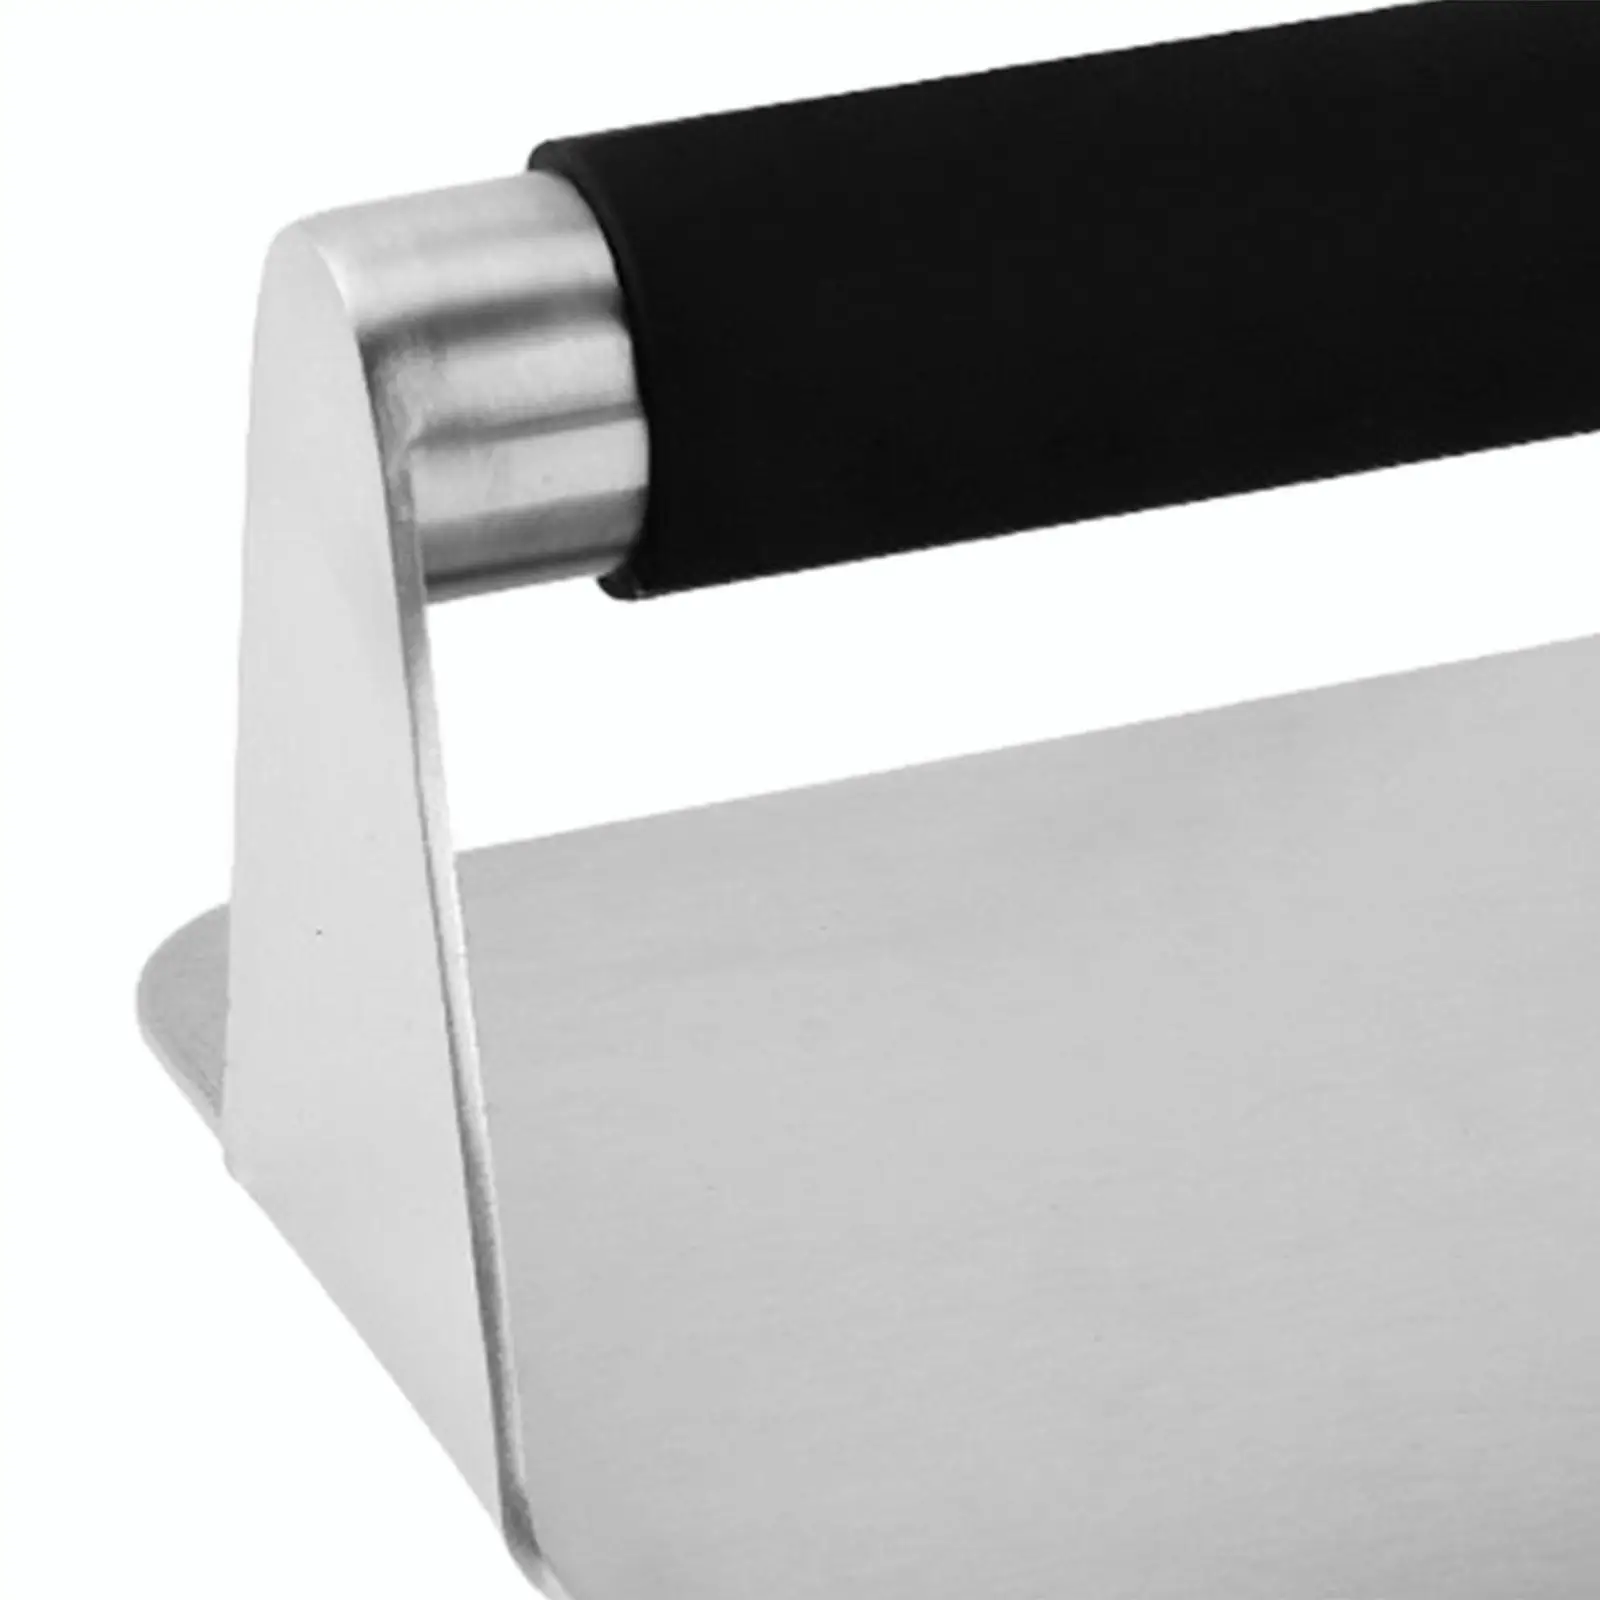 Stainless Steel Burger Press Nonstick Griddle Accessories Meat Steak Press Grill Press for Barbecue Sandwich Cooking Steaks